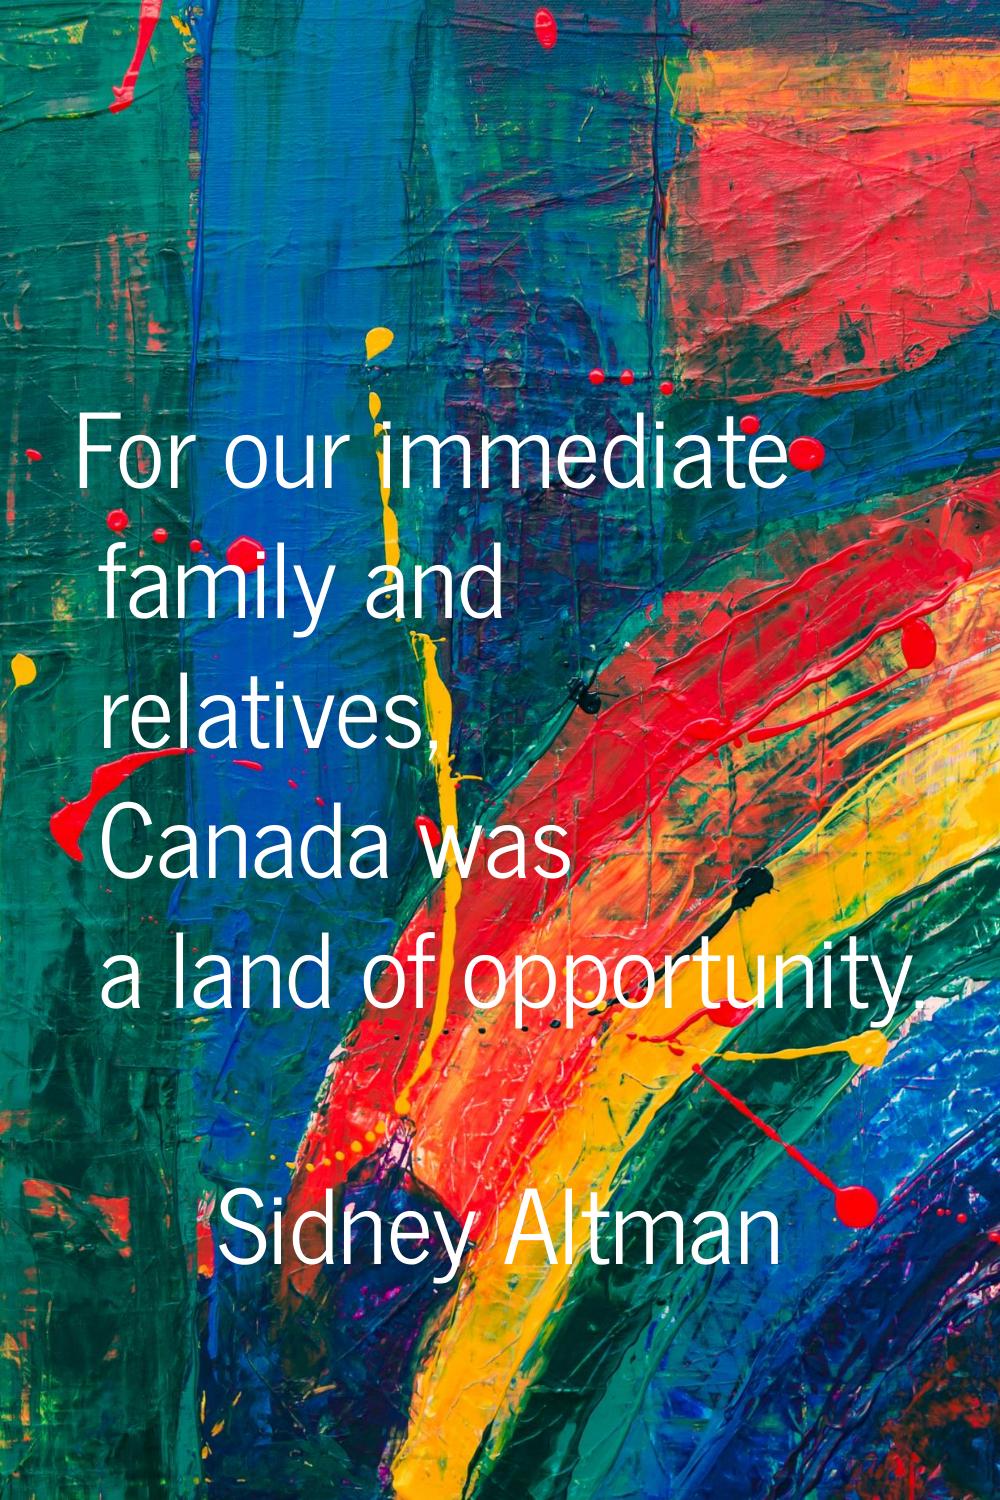 For our immediate family and relatives, Canada was a land of opportunity.